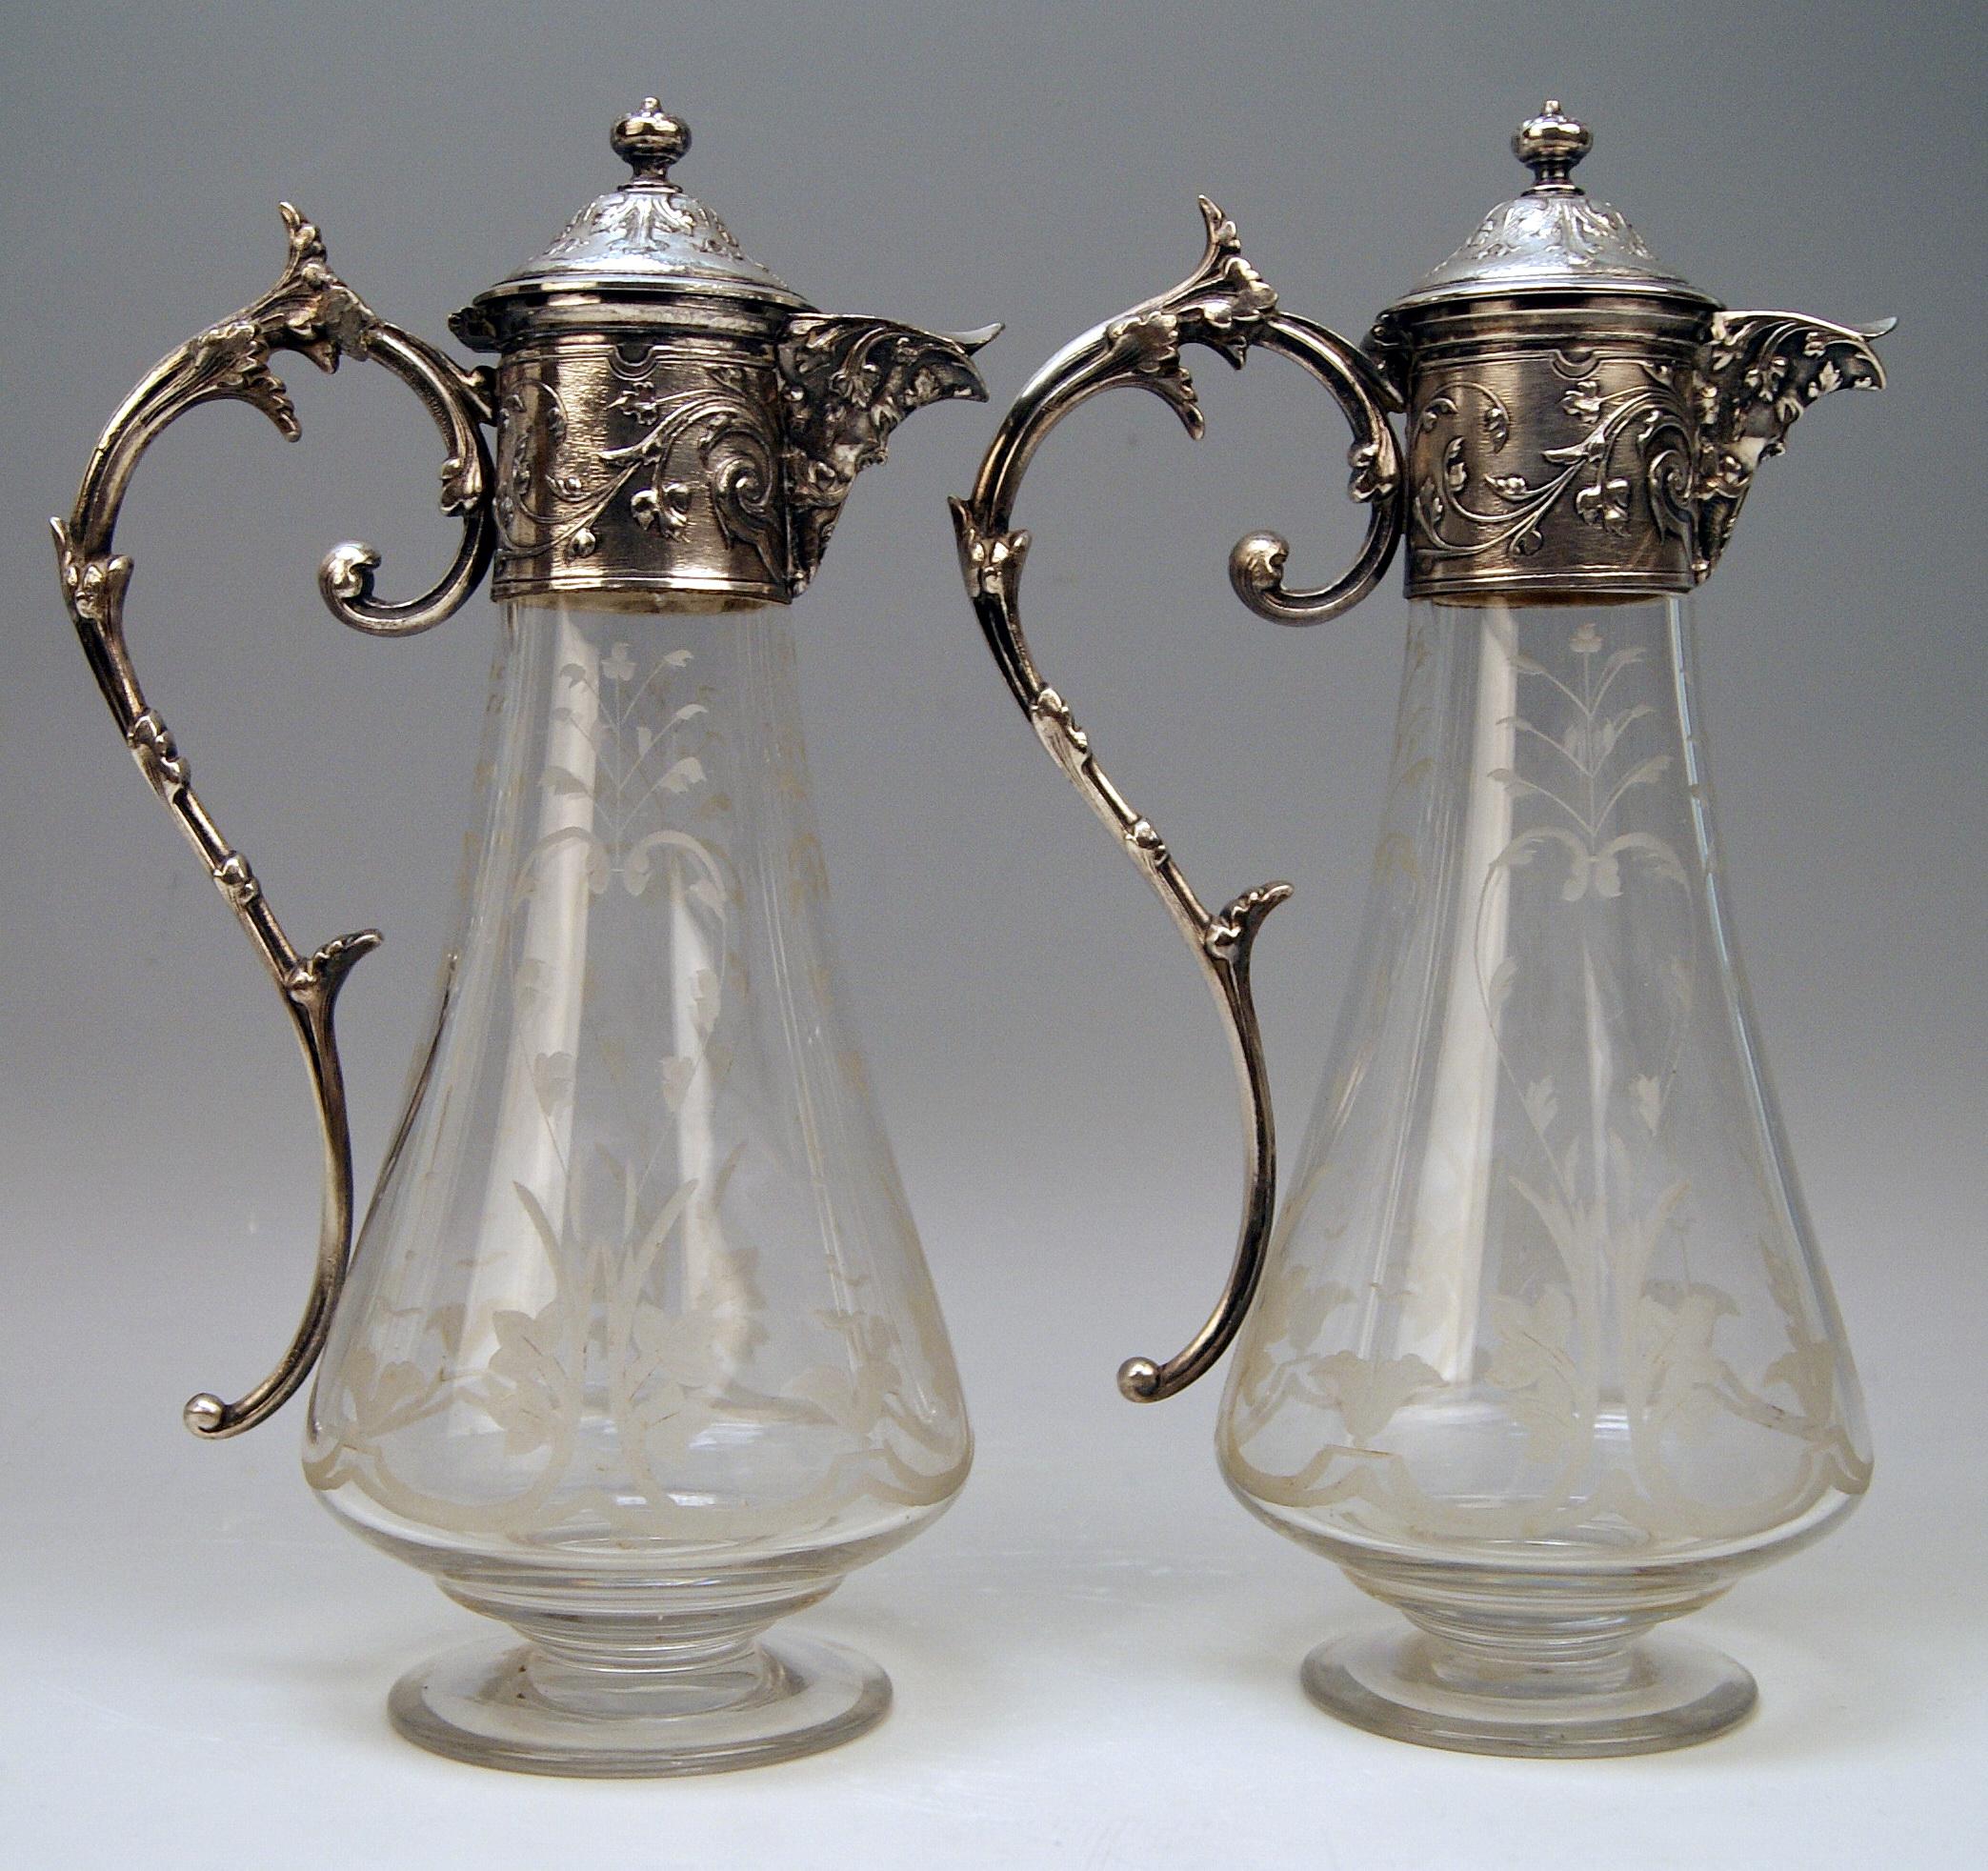 WMF Art Nouveau pair of claret and water jugs (pitchers) / silver plated (Germany).

Manufactory: WMF Germany Geislingen
Dating: Made circa 1900
Material: Metalware, Britannia Metal (Silver-plated)
Technique: Electrotype Metalware